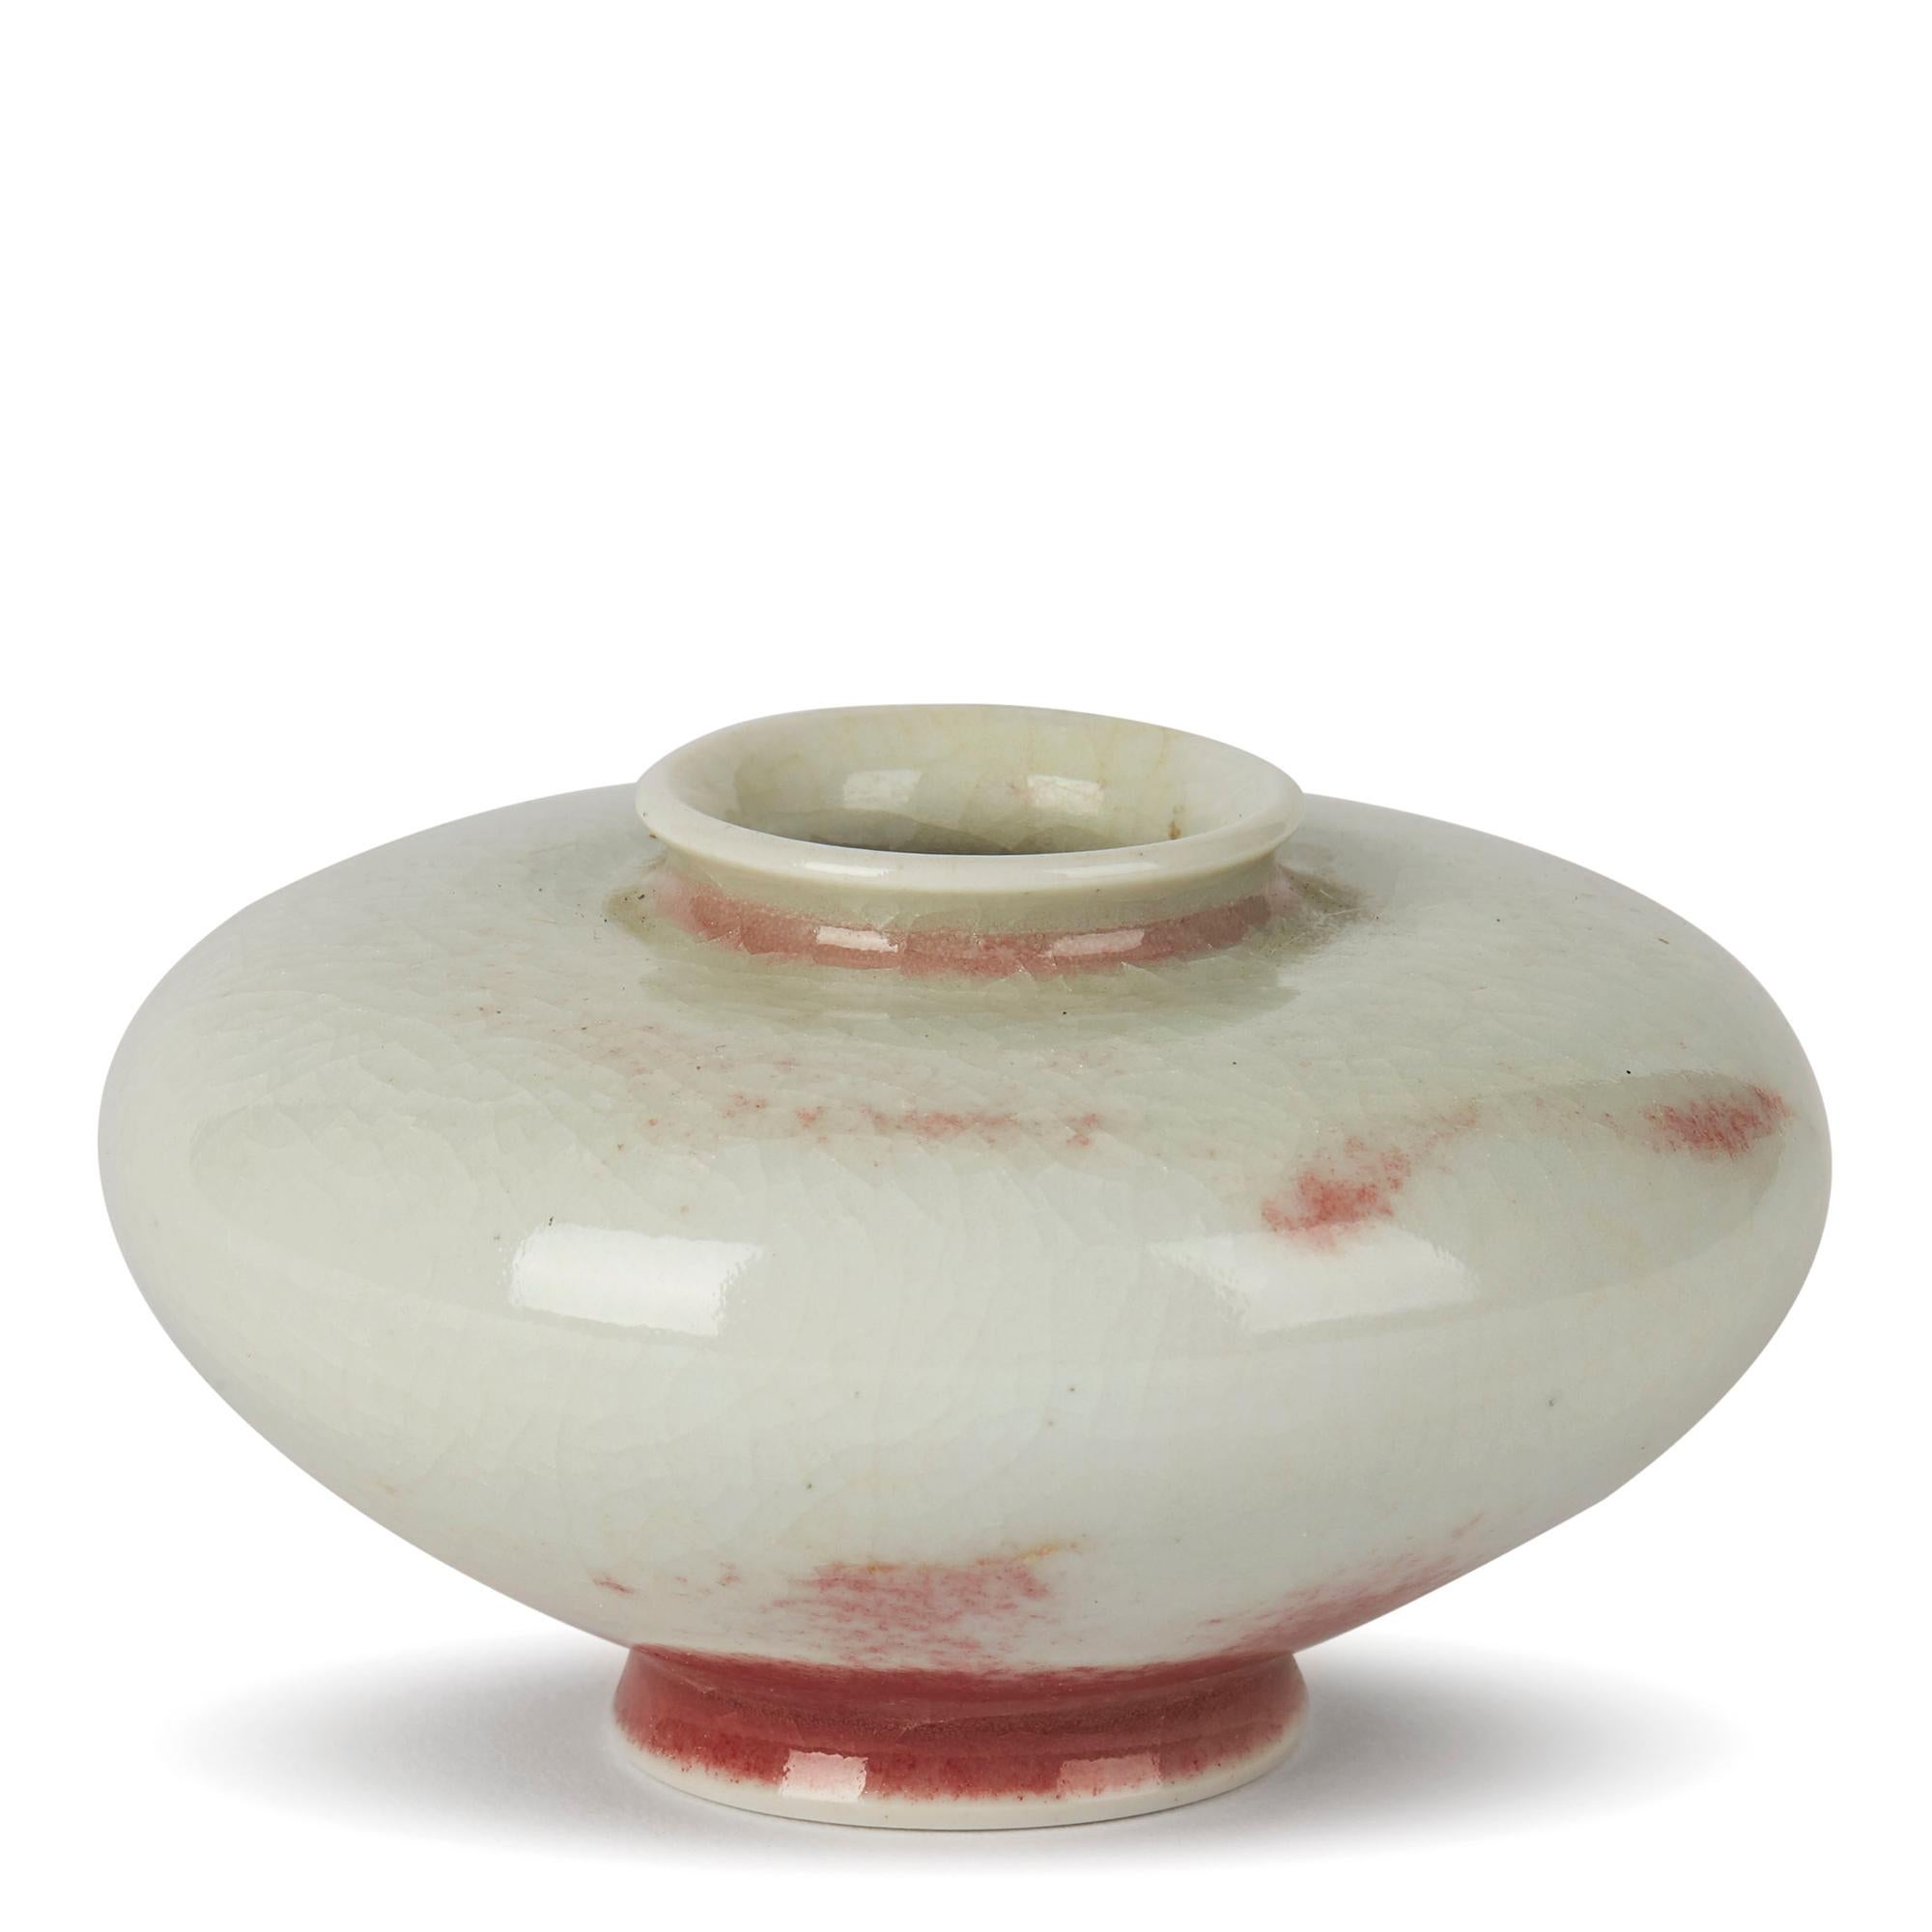 Glazed William Mehornay Studio Pottery Porcelain Red and White Vase, 1980-1985 For Sale